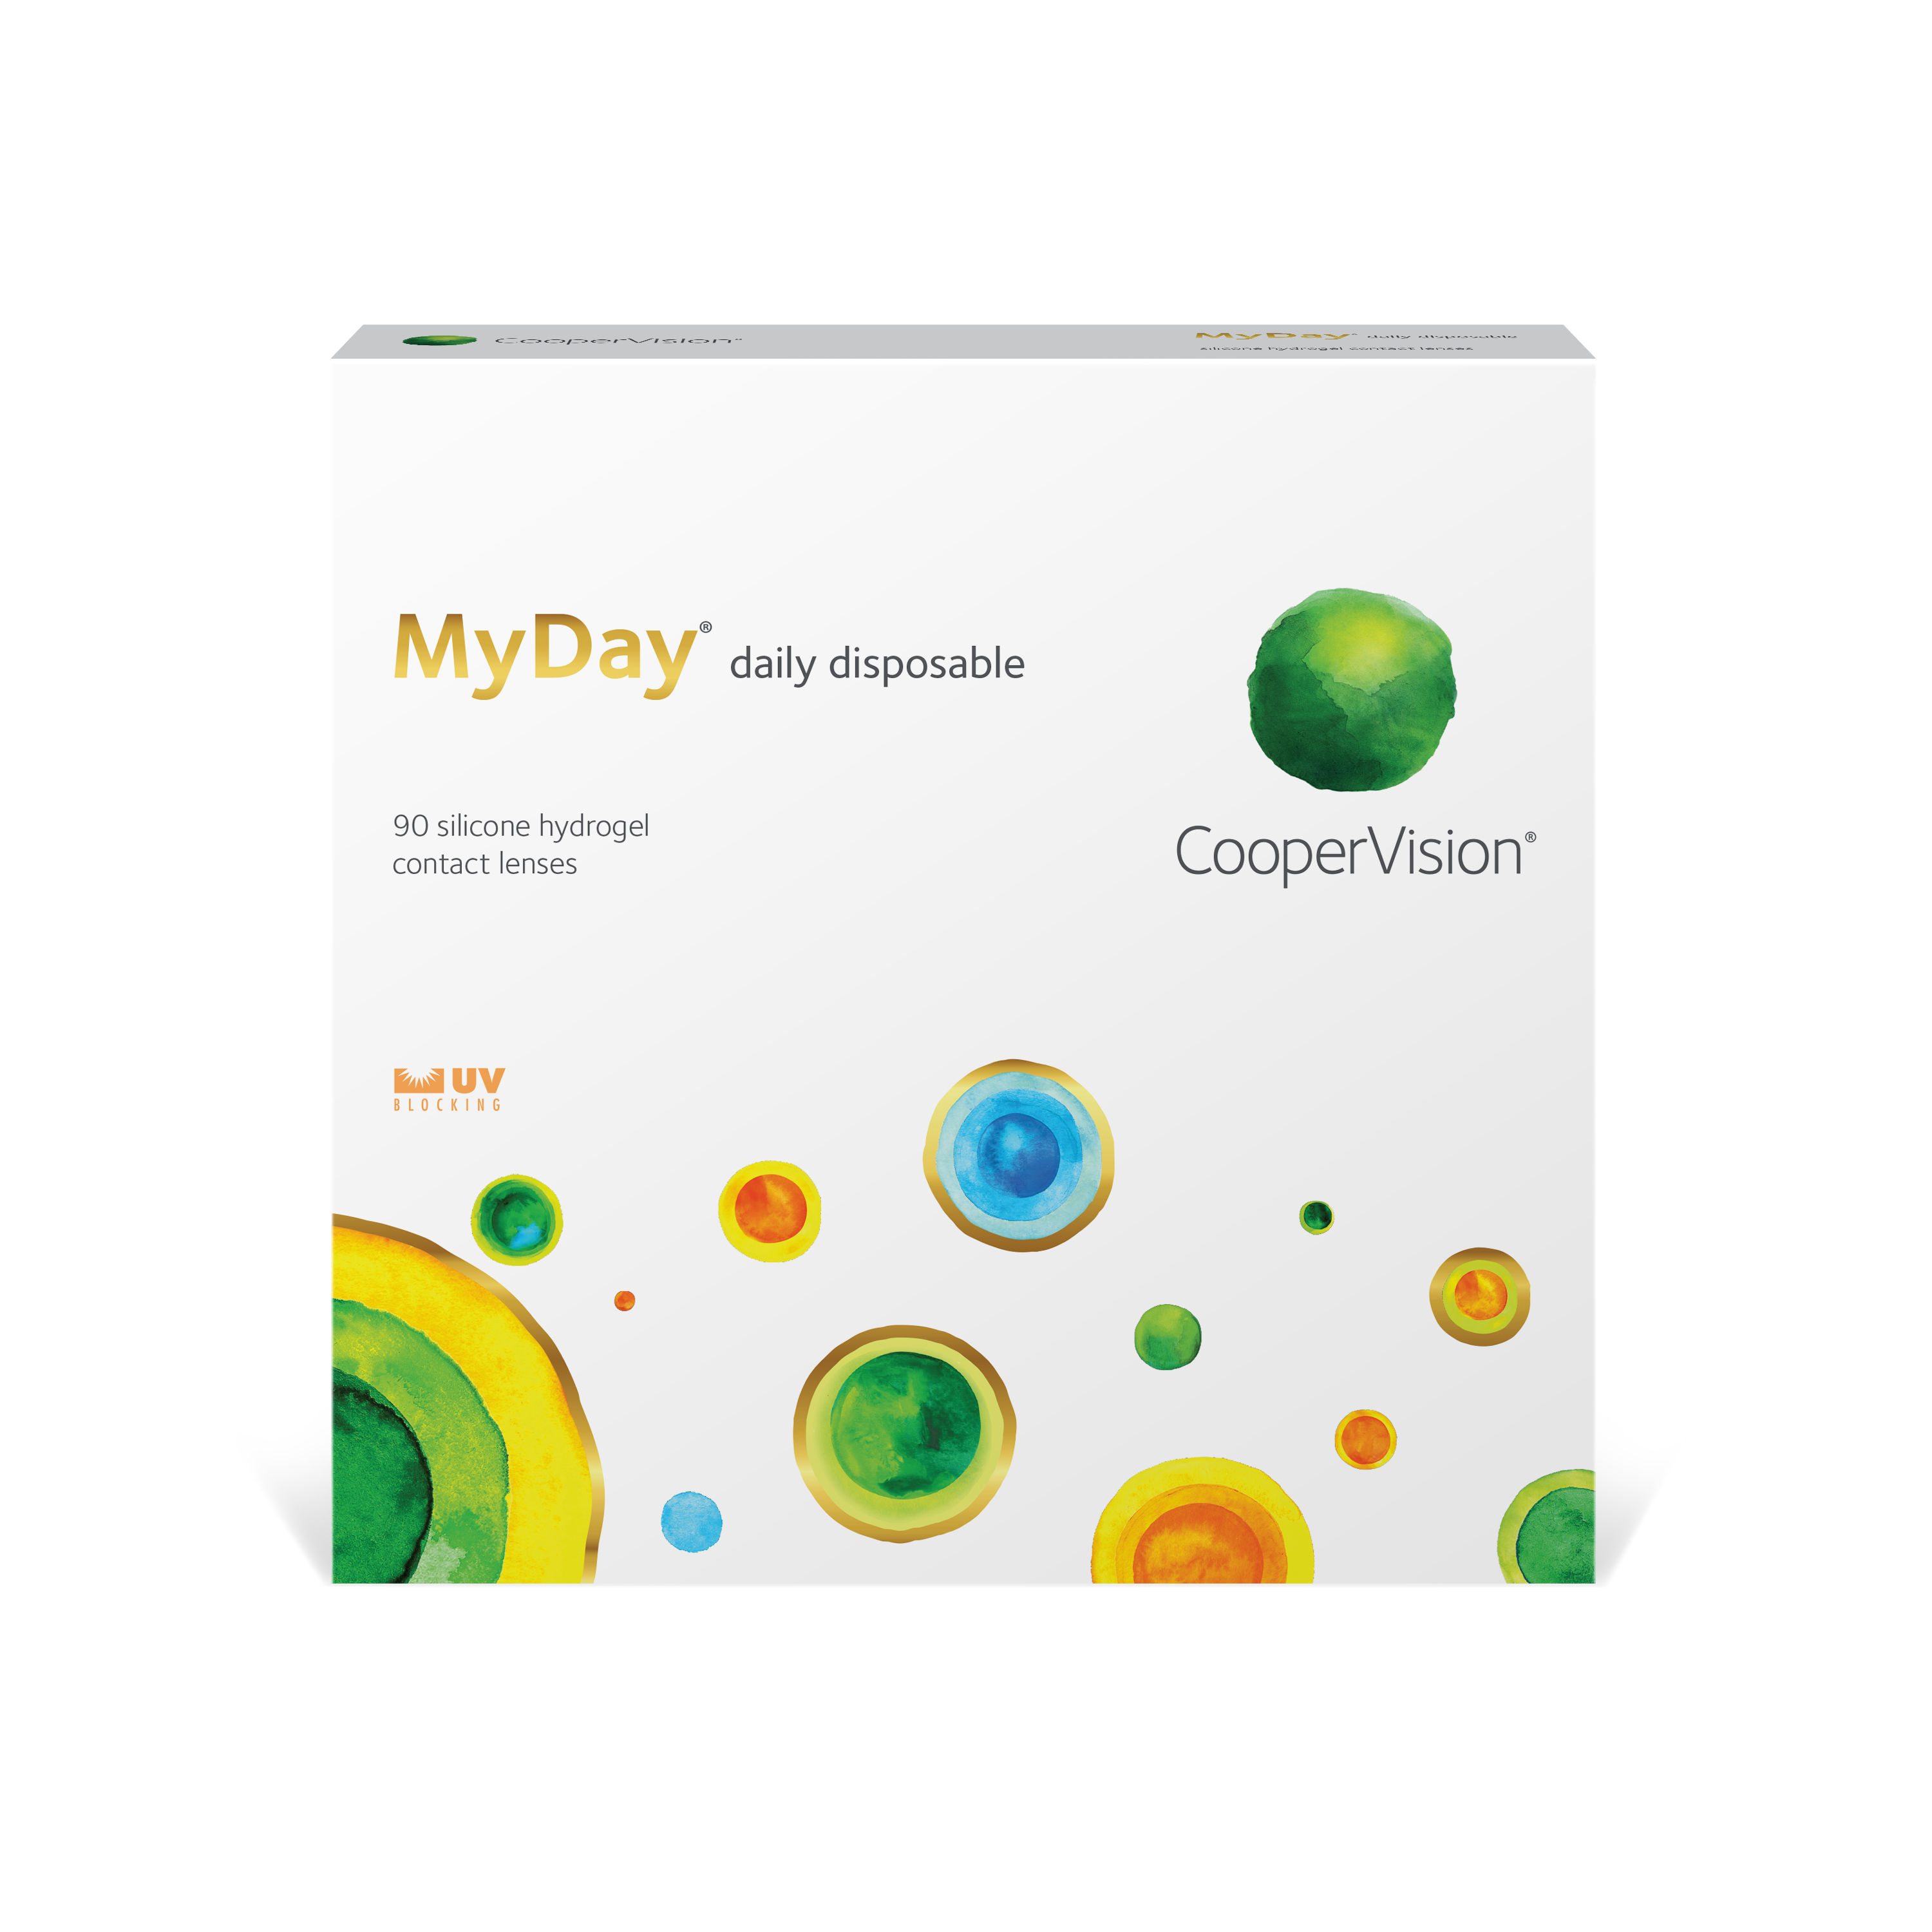 Arbeid behang overschrijving MyDay® daily disposable | CooperVision